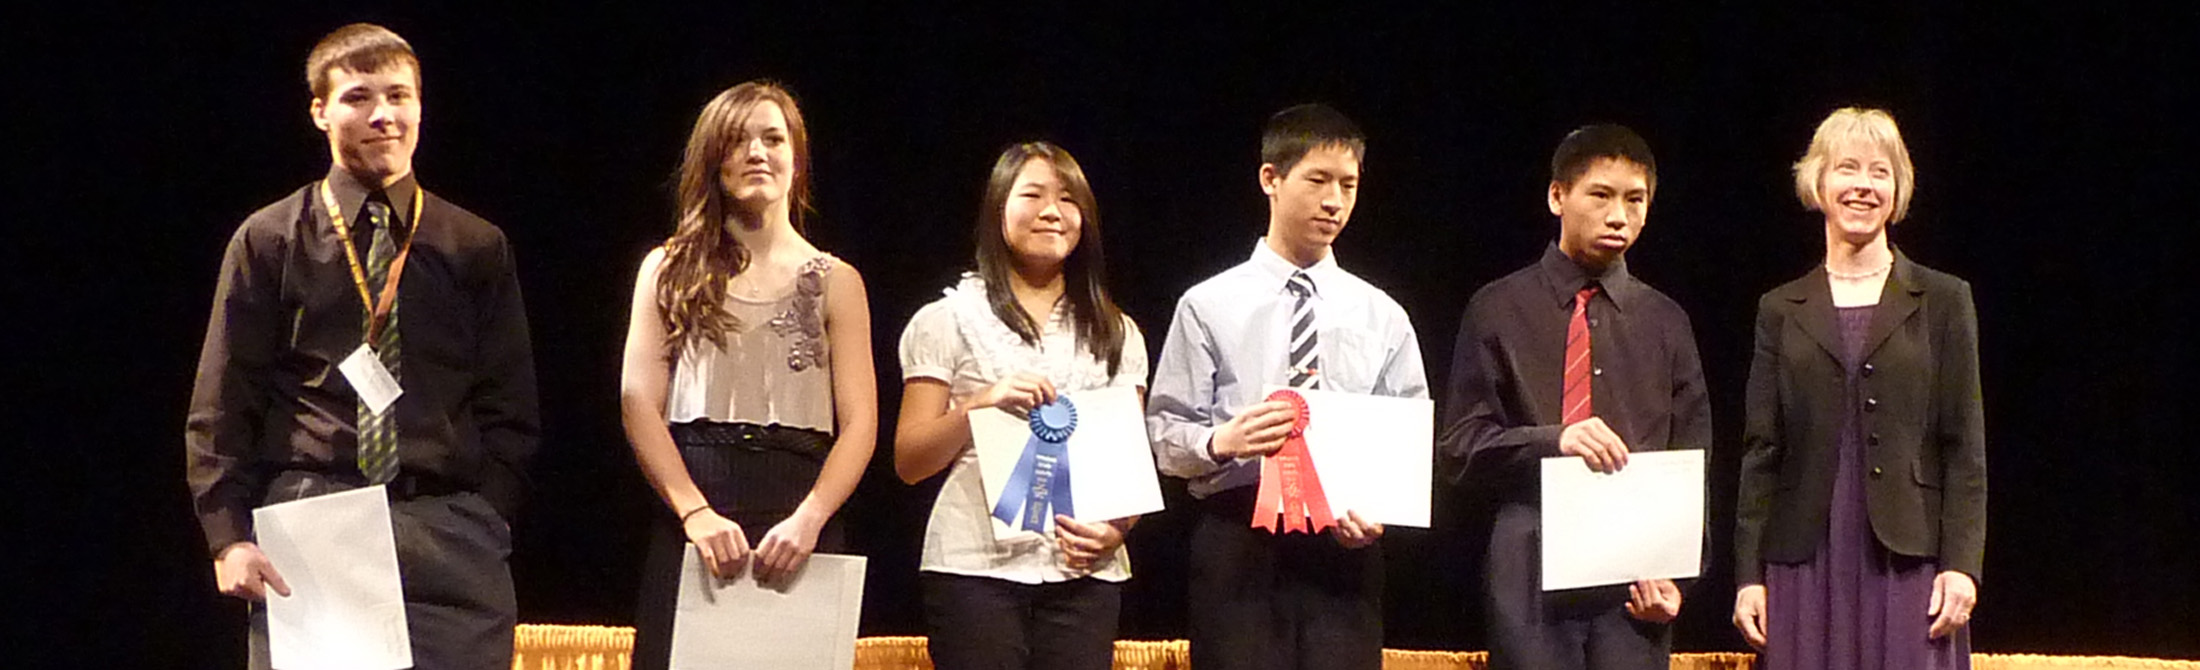 Wyoming State Science Fair awards from 2011.